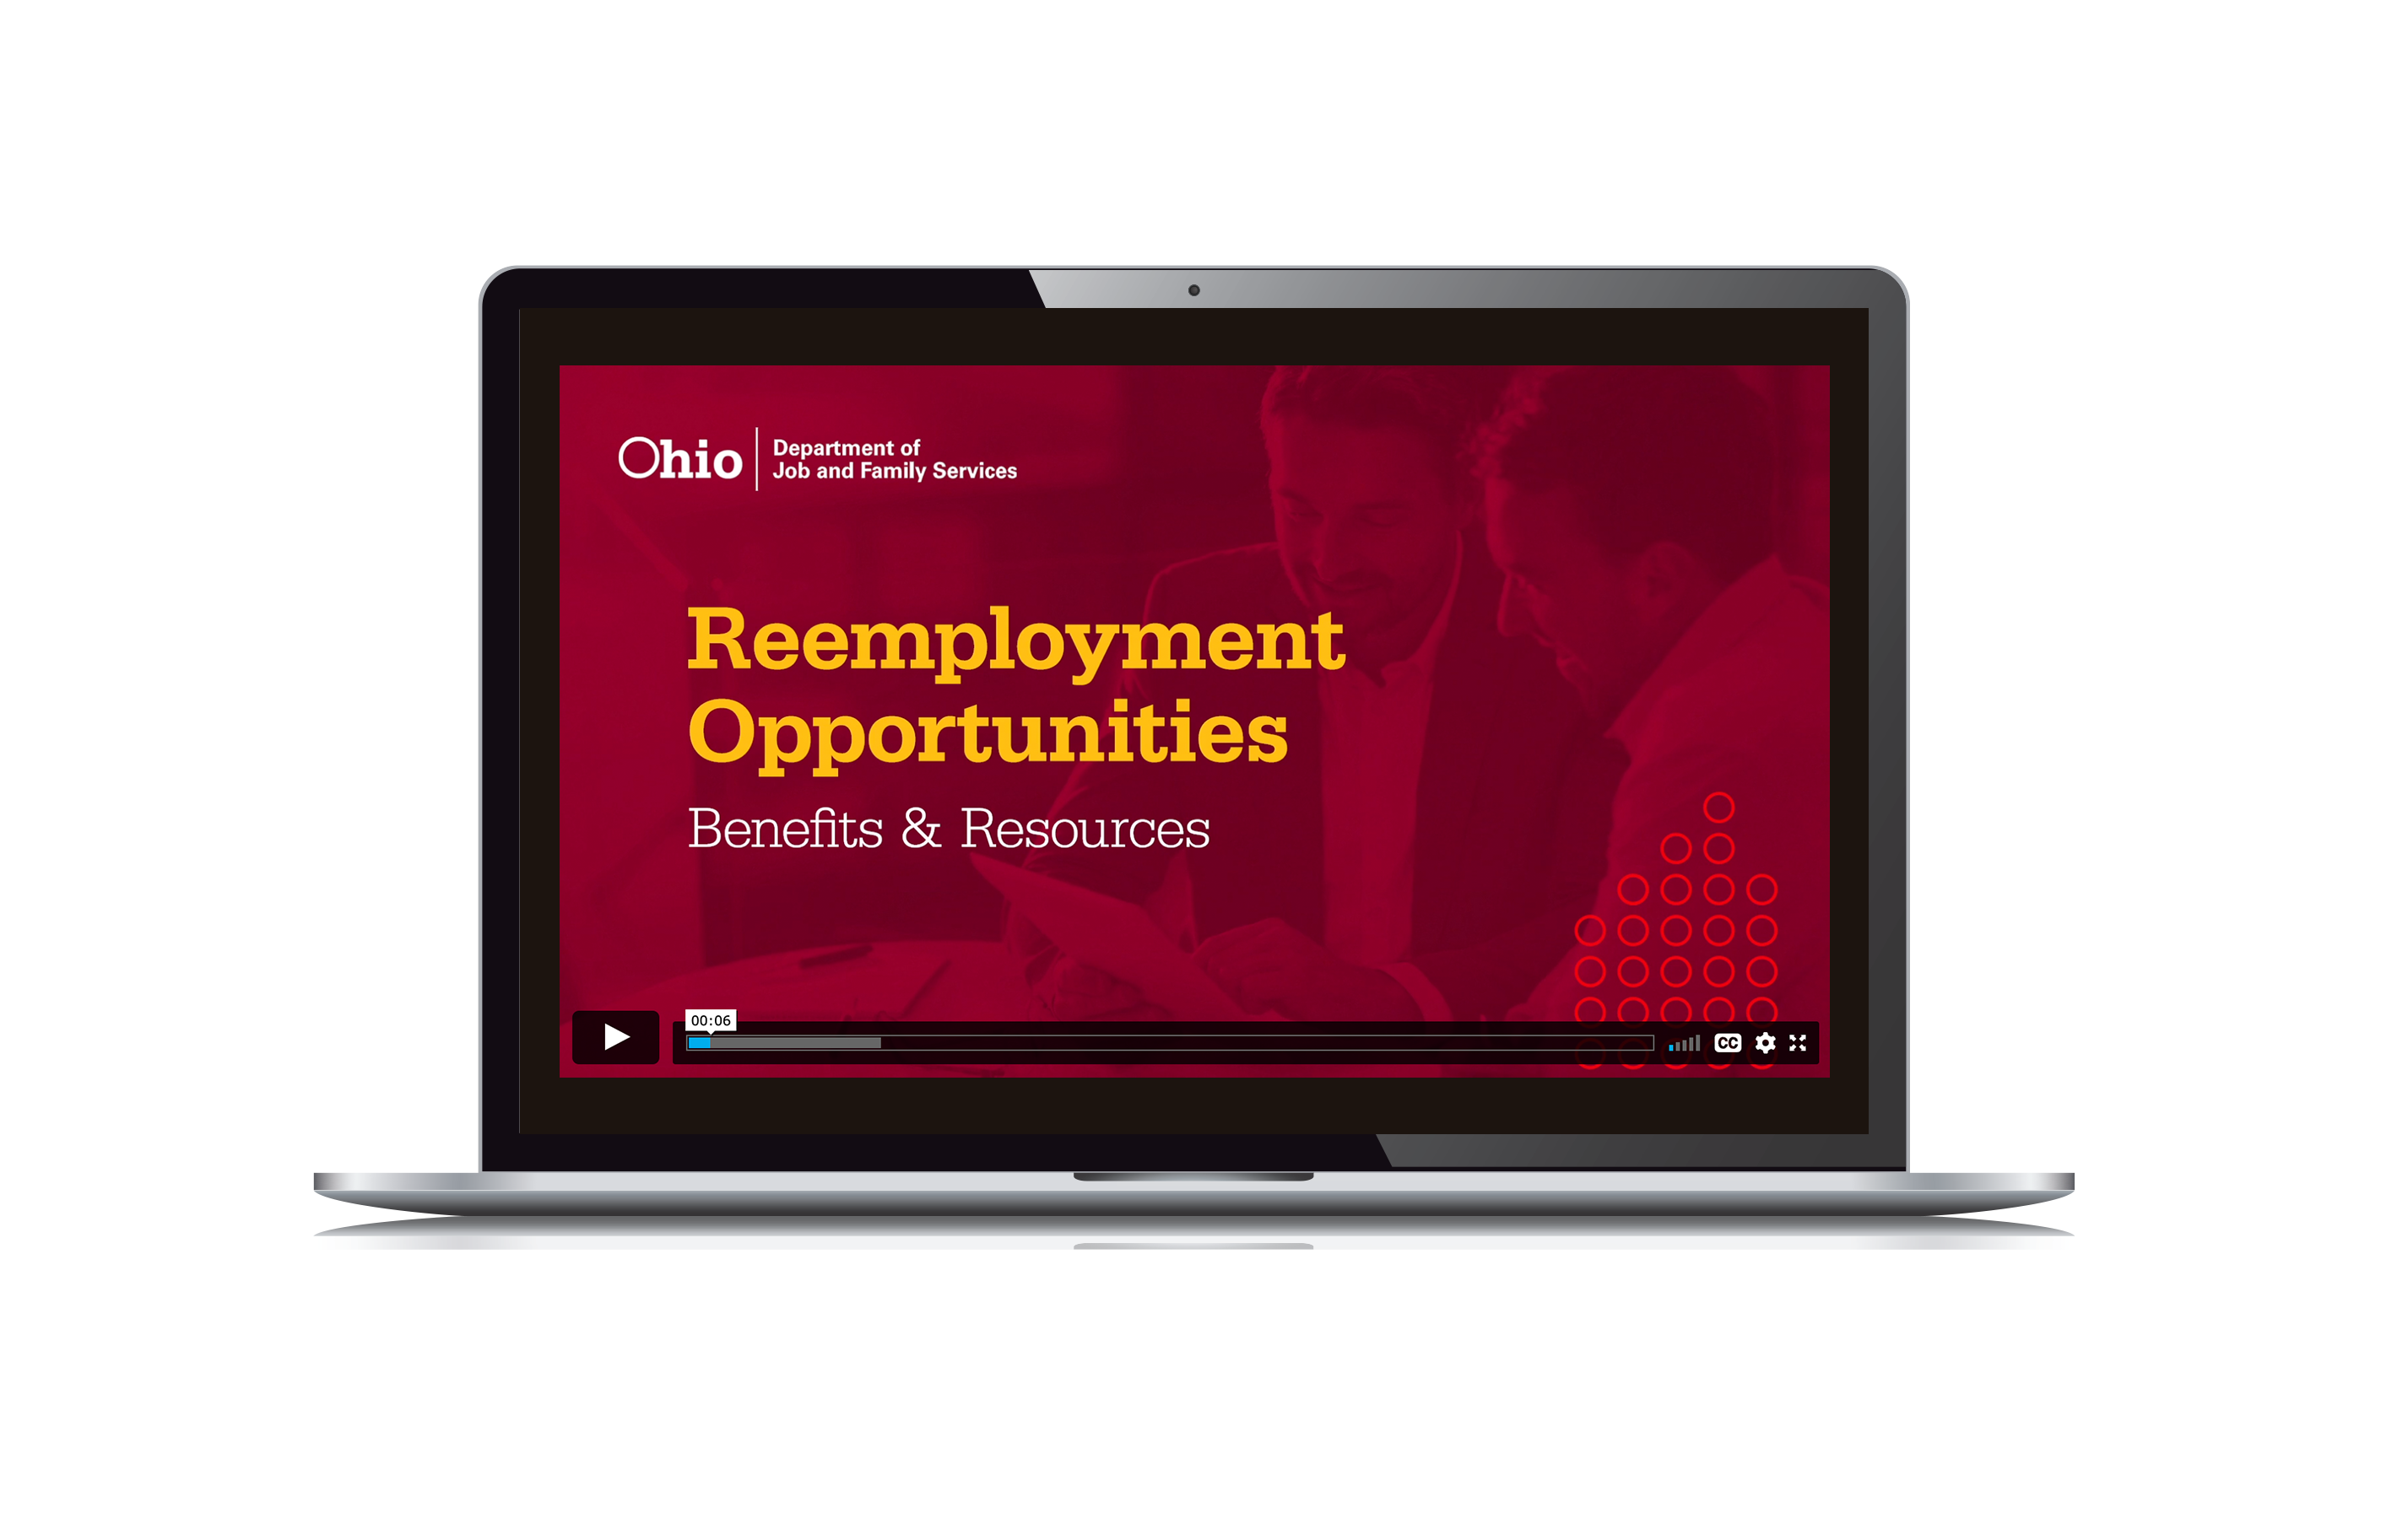 State of Ohio Department of Jobs and Family Services Reemployment Opportunities video title screen displayed on a laptop